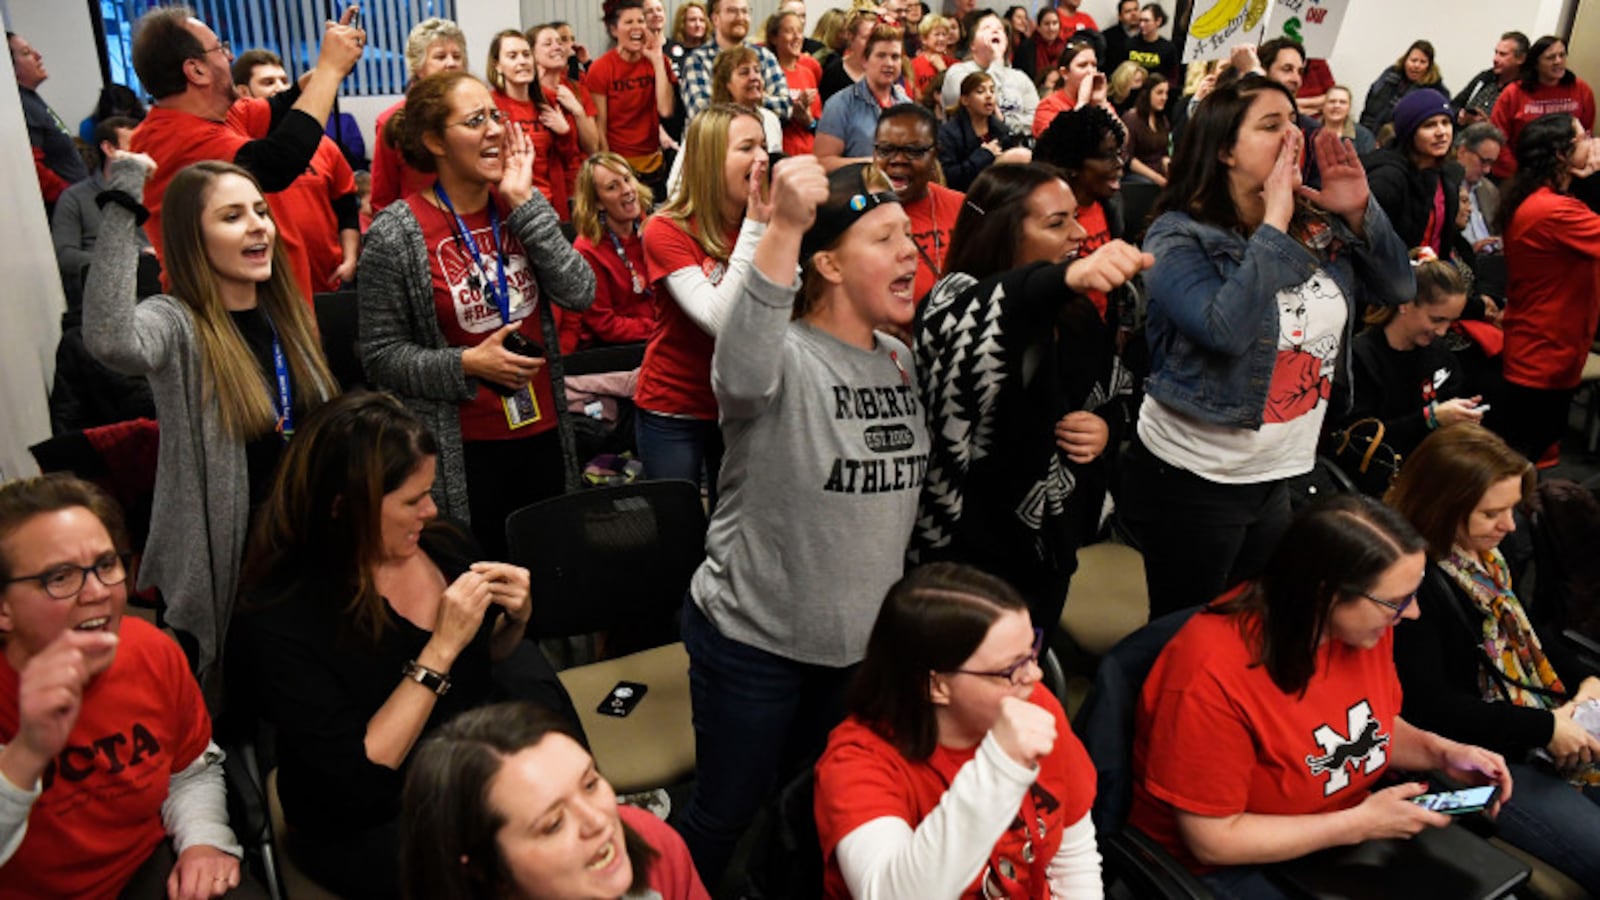 Denver teachers and their supporters get fired up before the Denver Classroom Teachers Association negotiations with Denver Public Schools district officials on Friday evening.